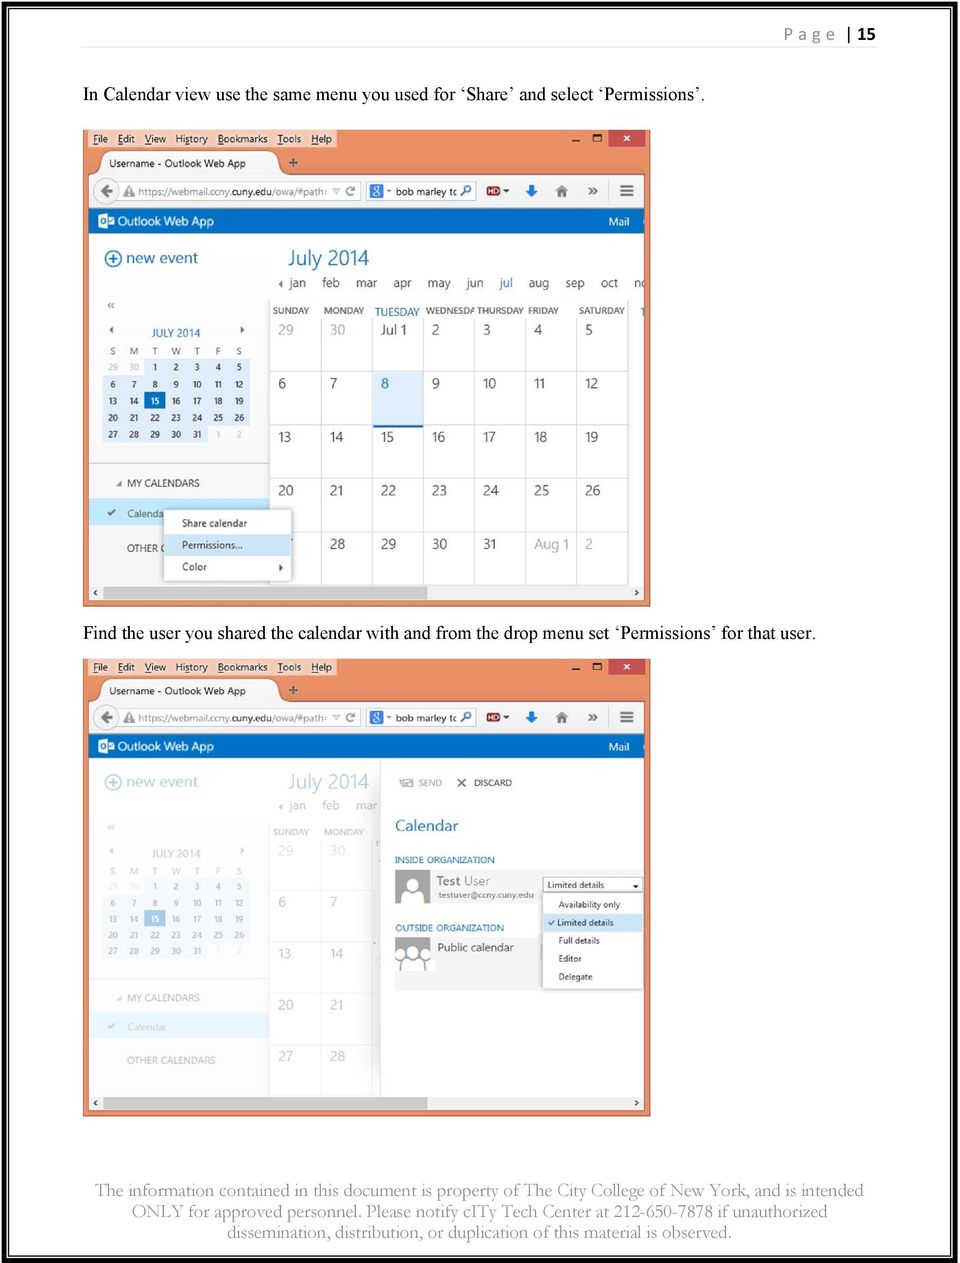 Find the user you shared the calendar with